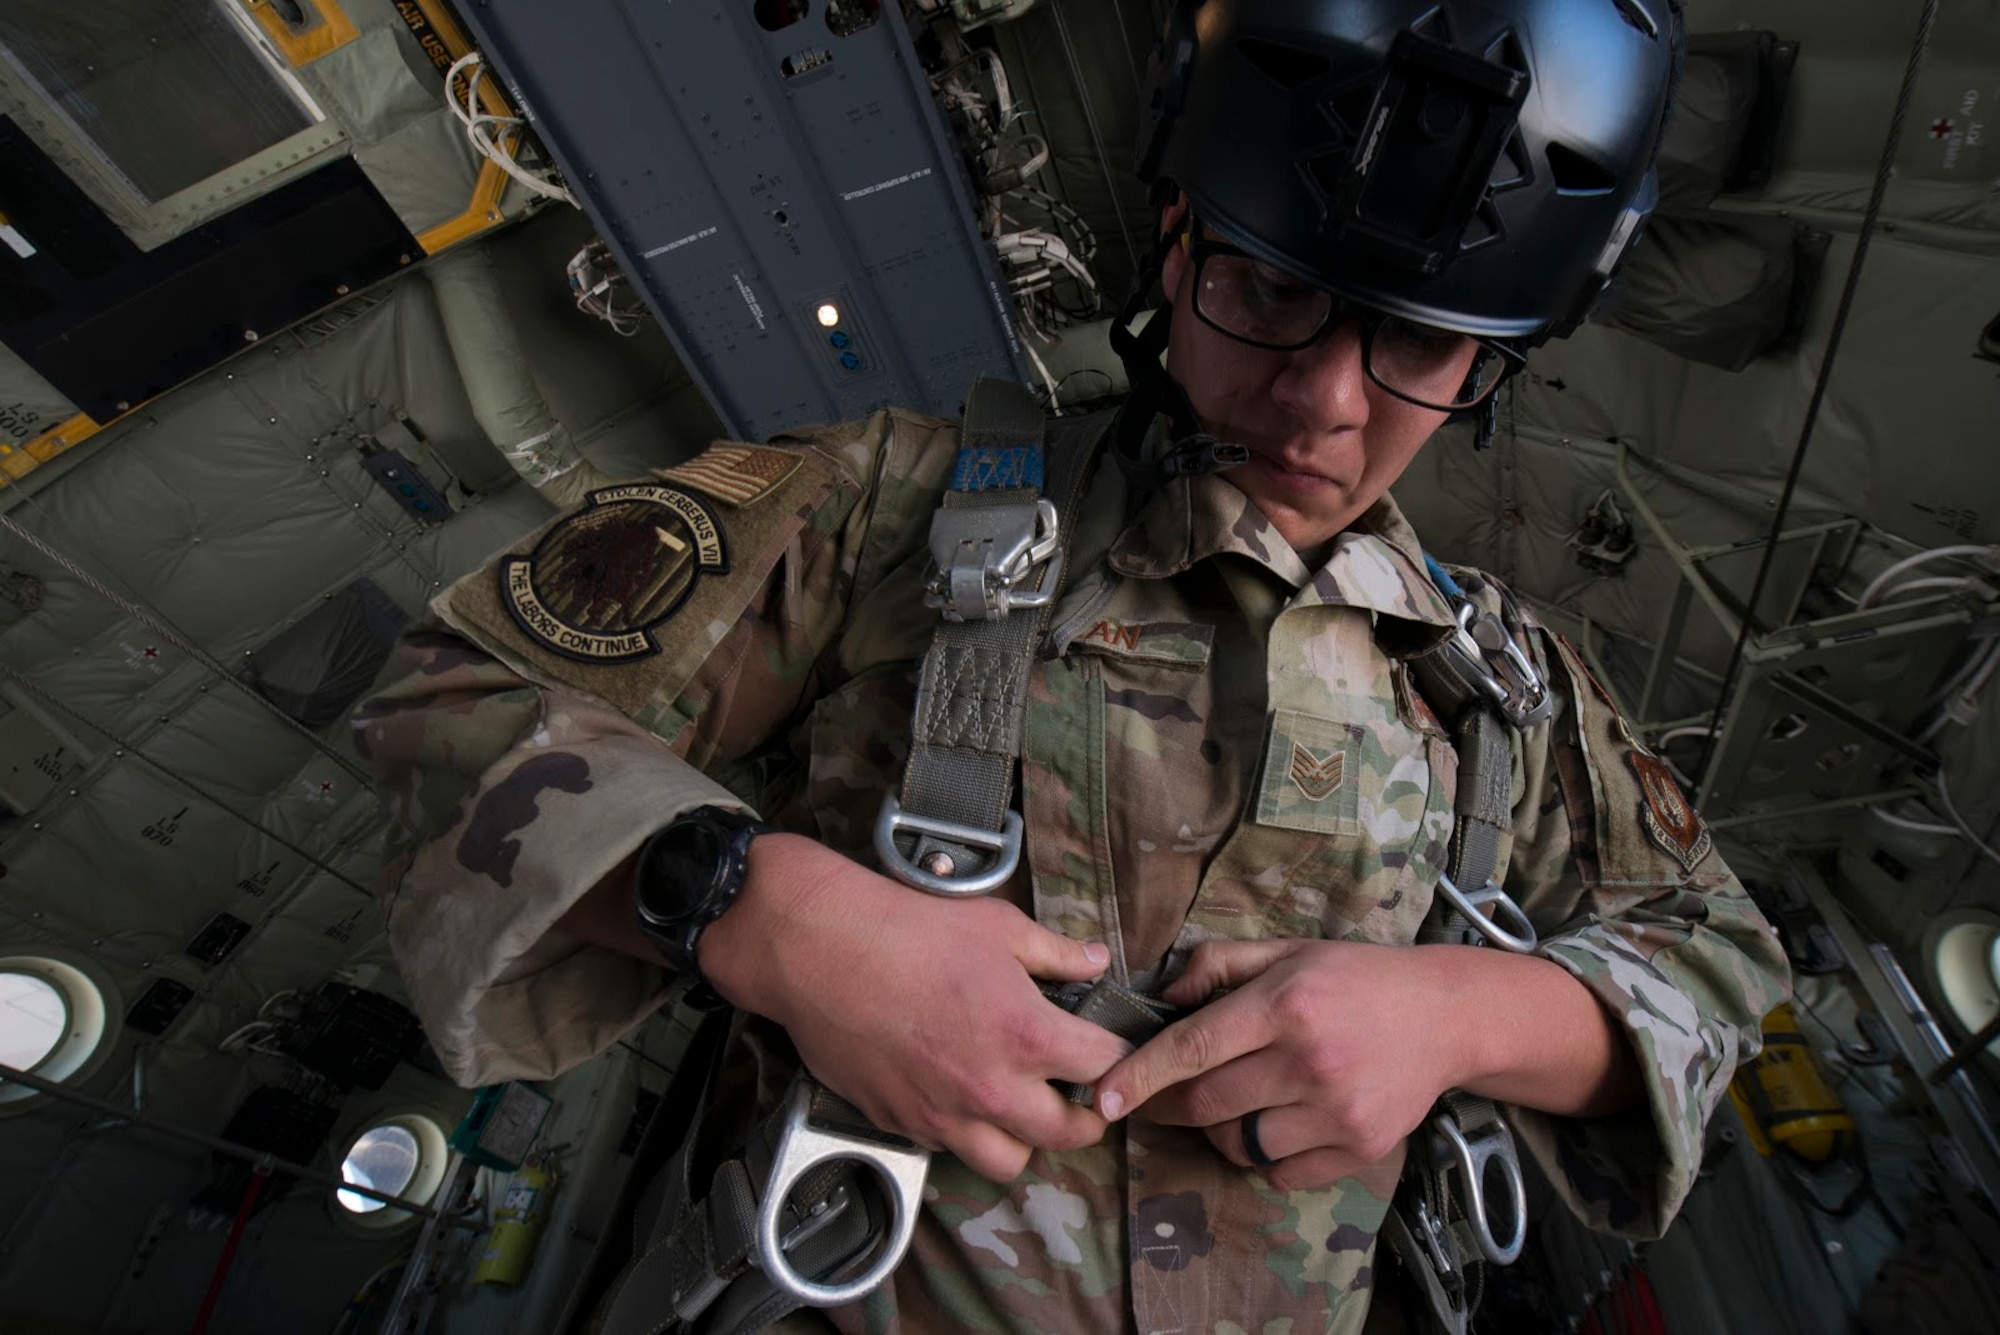 U.S. Air Force Staff Sgt. Seth Allan, 435th Contingency Response Squadron independent duty medical technician, secures his parachute before takeoff at Elefsis Air Base, Greece, Sept. 11, 2020. IDMTs are trained to treat any active duty member for illness or injury in the absence of a medical provider. (U.S. Air Force photo by Airman 1st Class Taylor D. Slater)